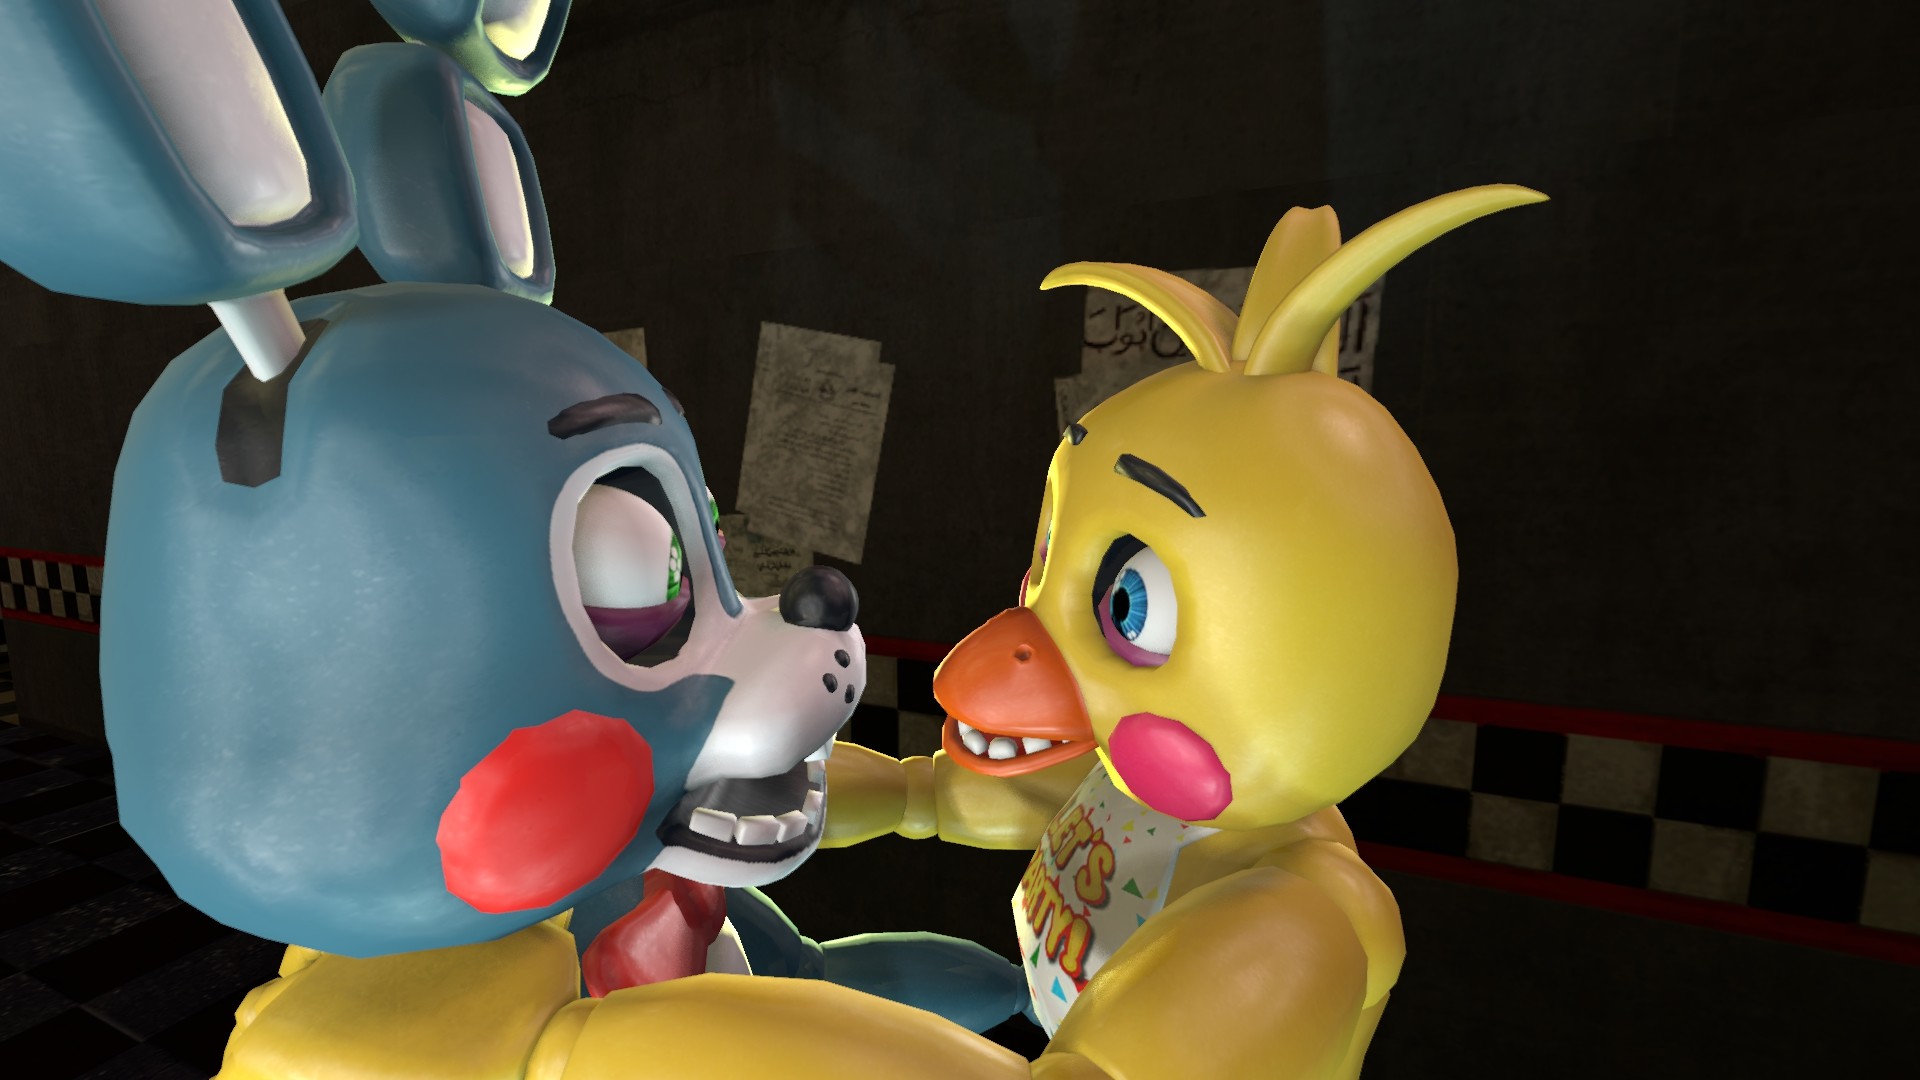 1920x1080 ... Toy Chica and Toy Bonnie by Mathieulebest